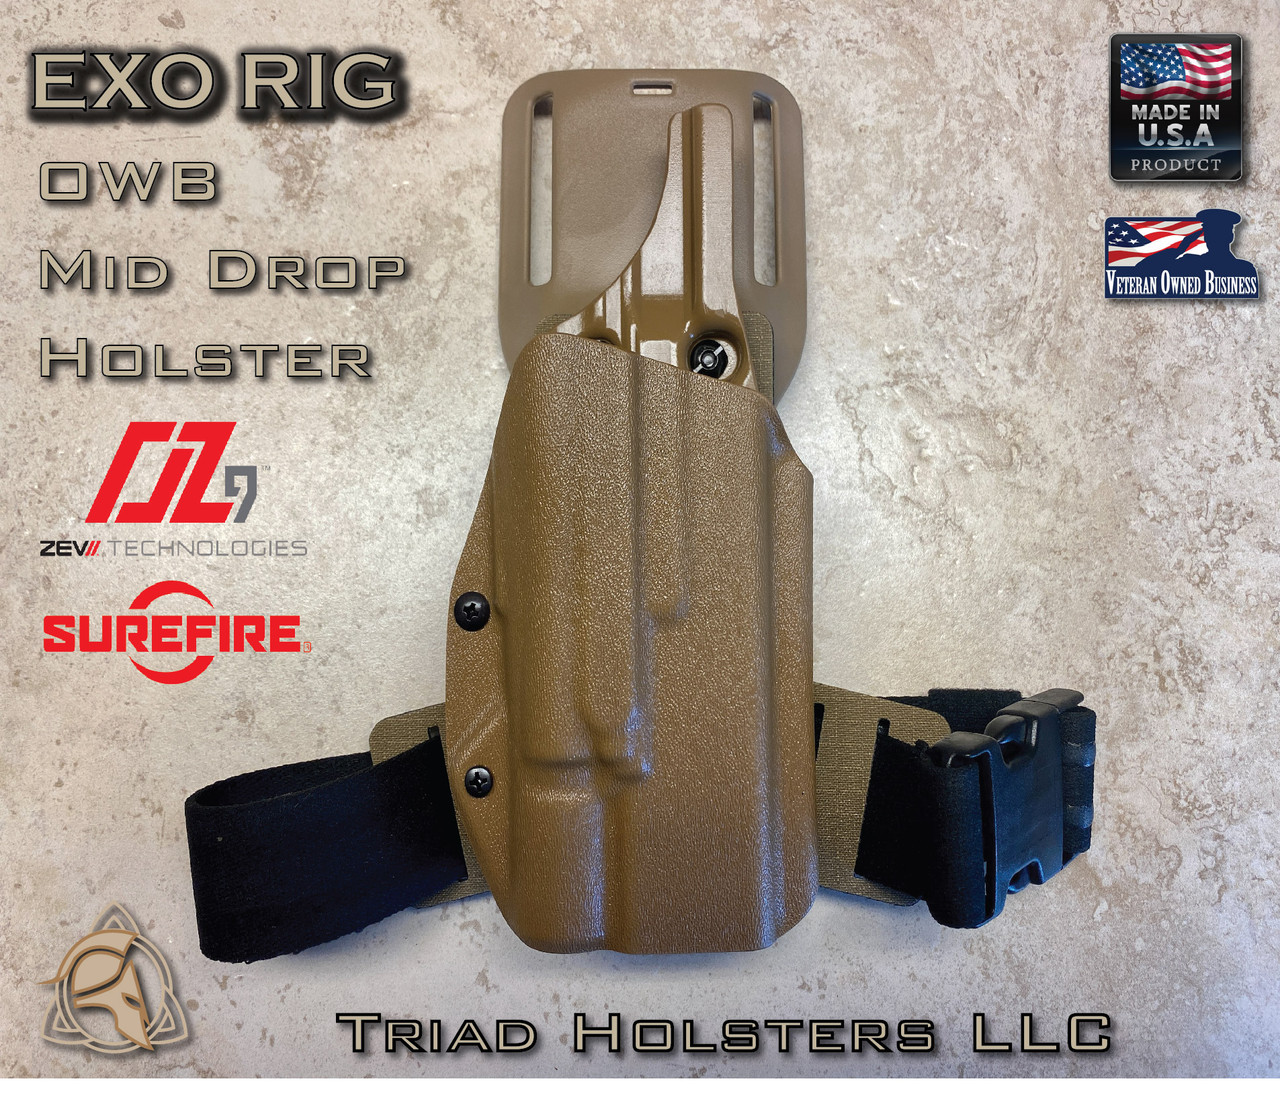 Kydex Holster | Triad Holsters LLC |EXO Holster for the ZEV OZ-9 and